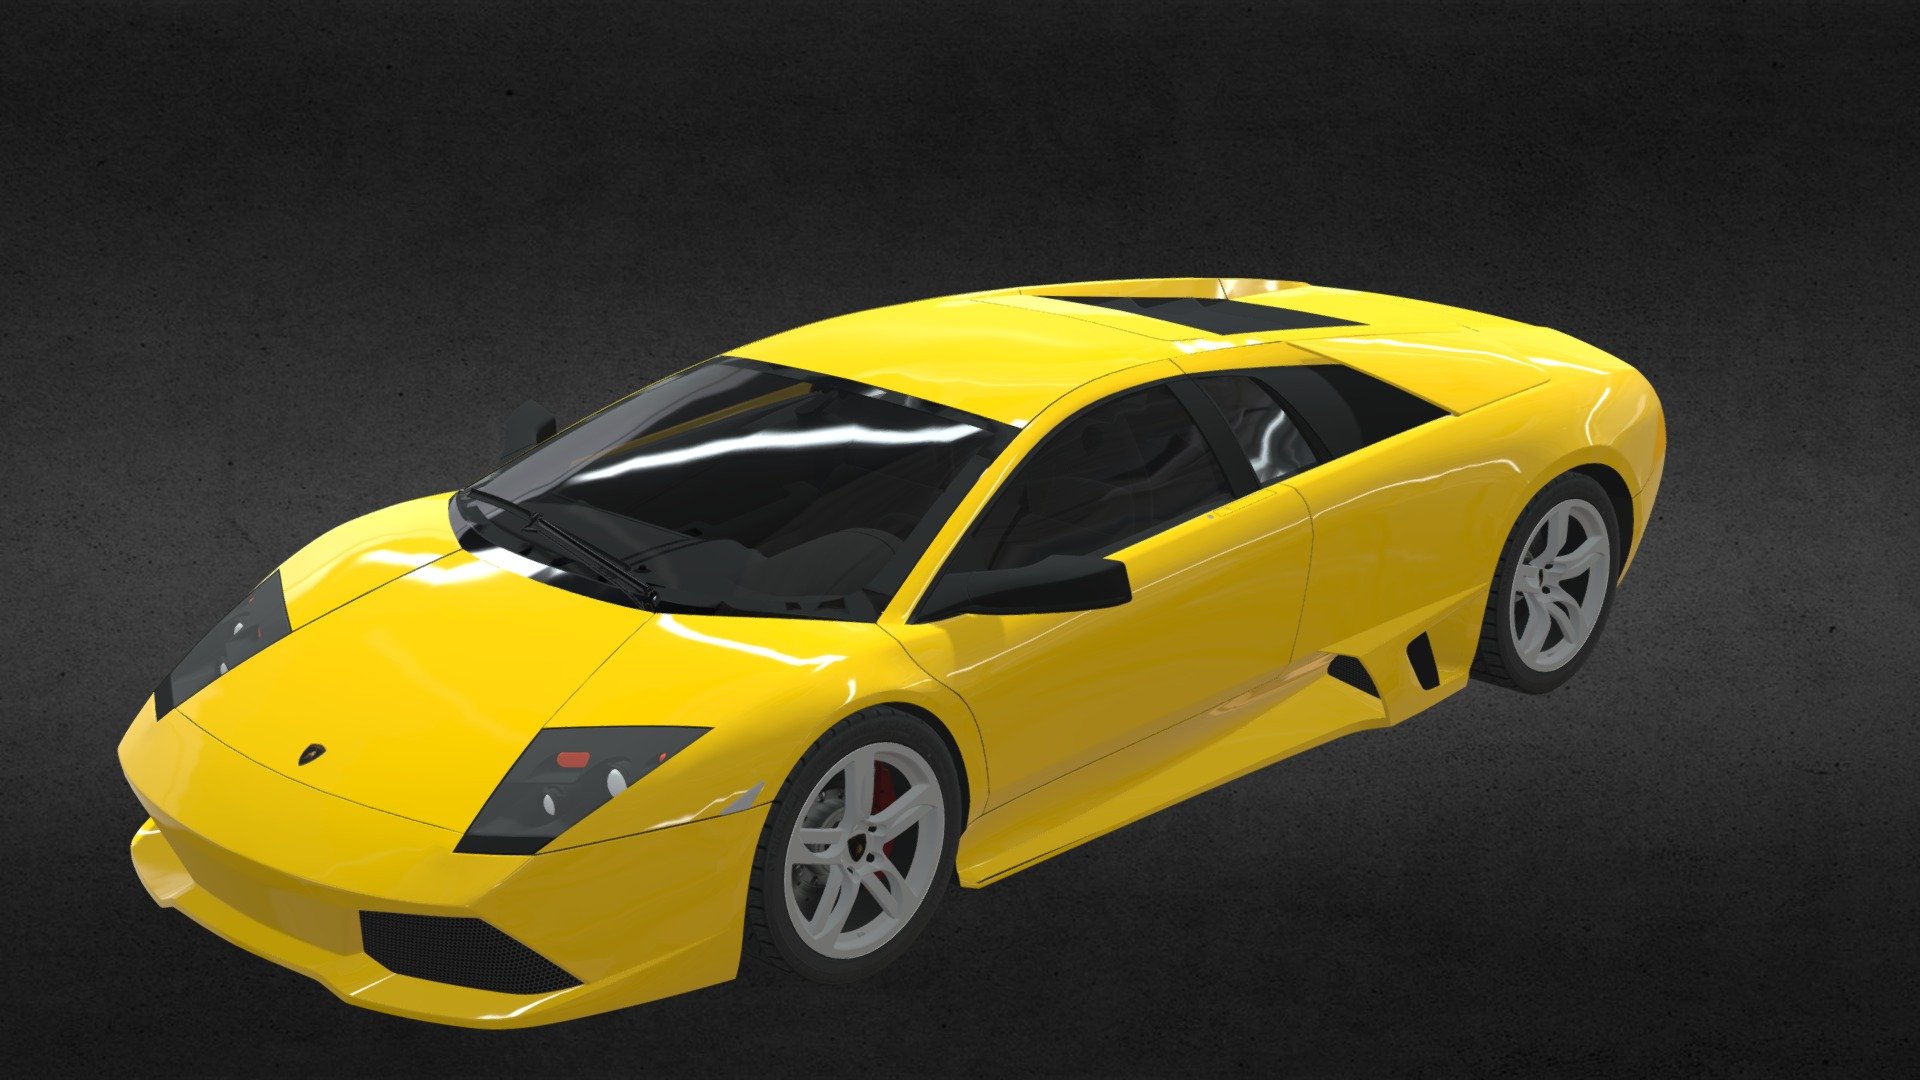 The 2007 Lamborghini Murcielago comes as an all-new, all-powerful 2-door LP640 coupe and matching roadster. &hellip; The 2007 Murcielago hits 640-hp (up 60-hp from 2006) with its 6.5-liter, V12 engine and 6-speed manual transmission. An E-gear clutchless paddle shifter transmission is optional 3d model